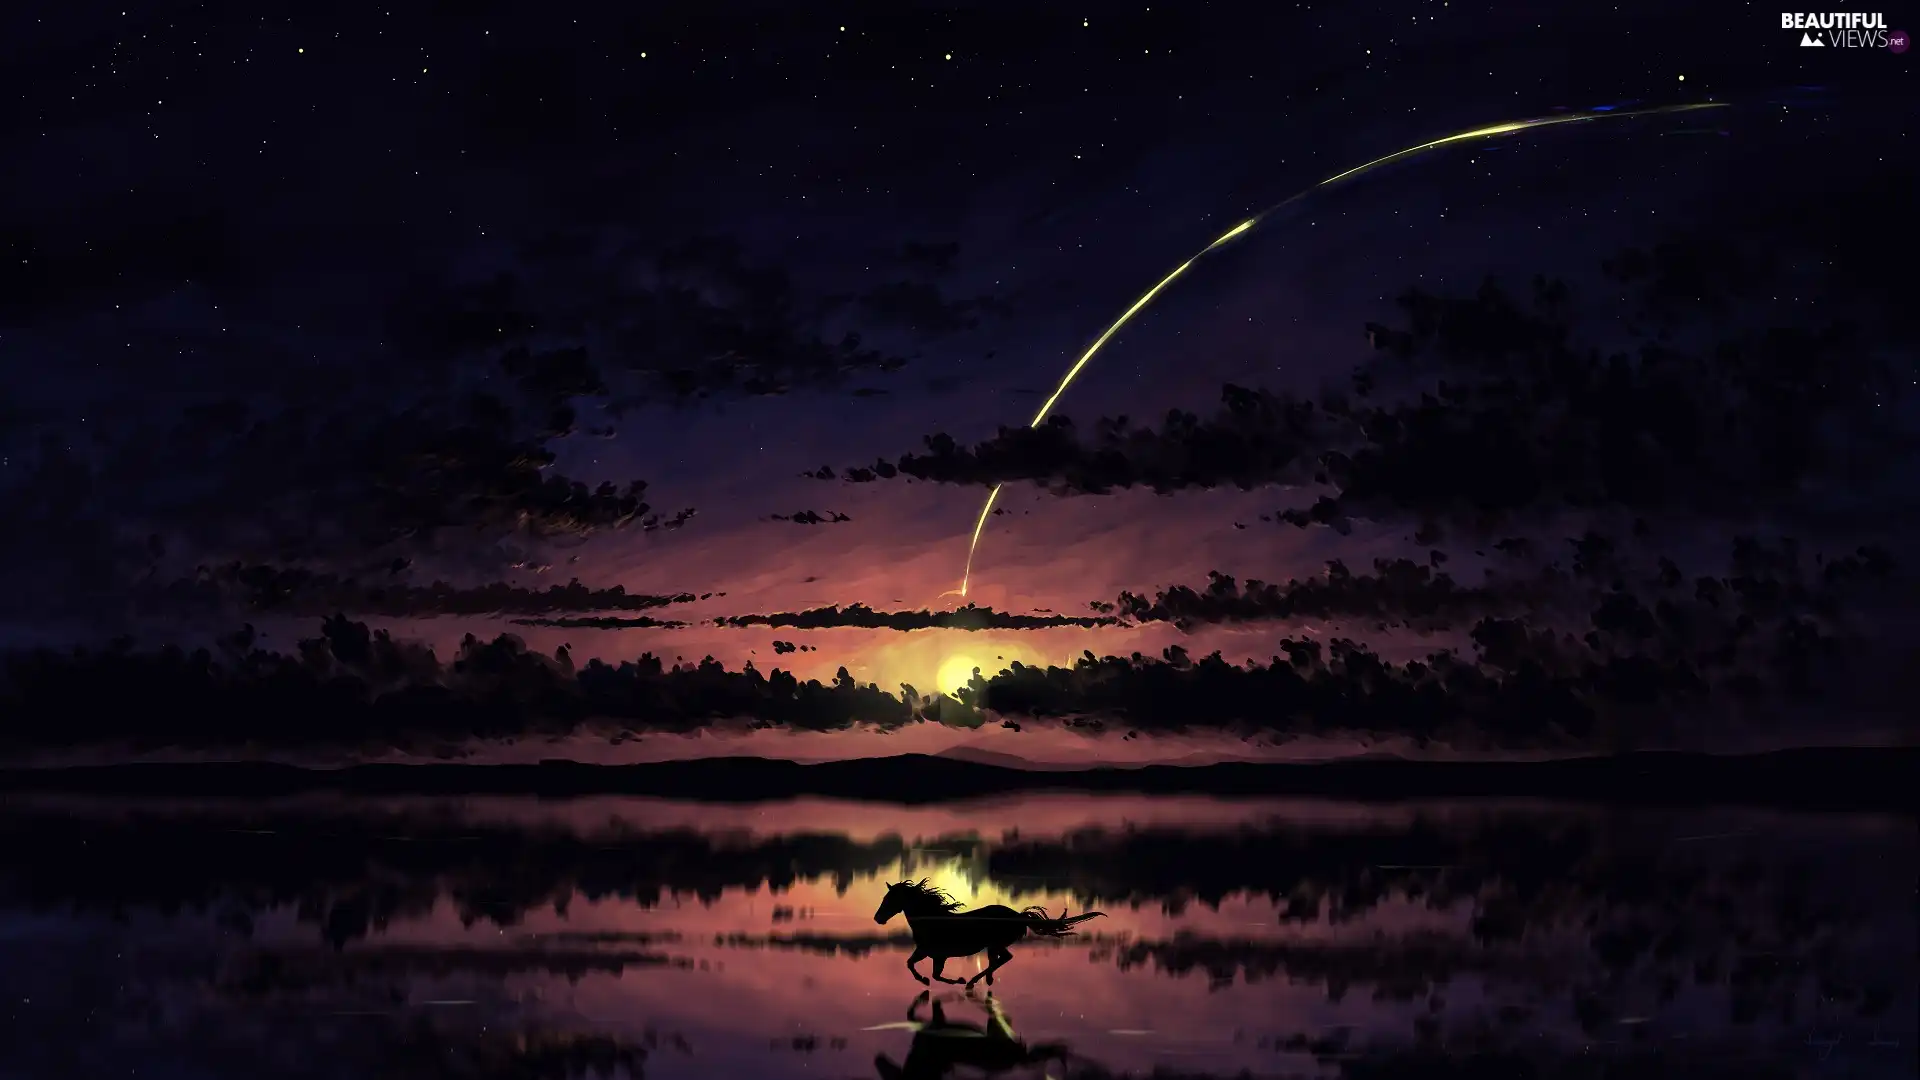 star, Night, moon, lake, Horse, graphics, trees, viewes, reflection